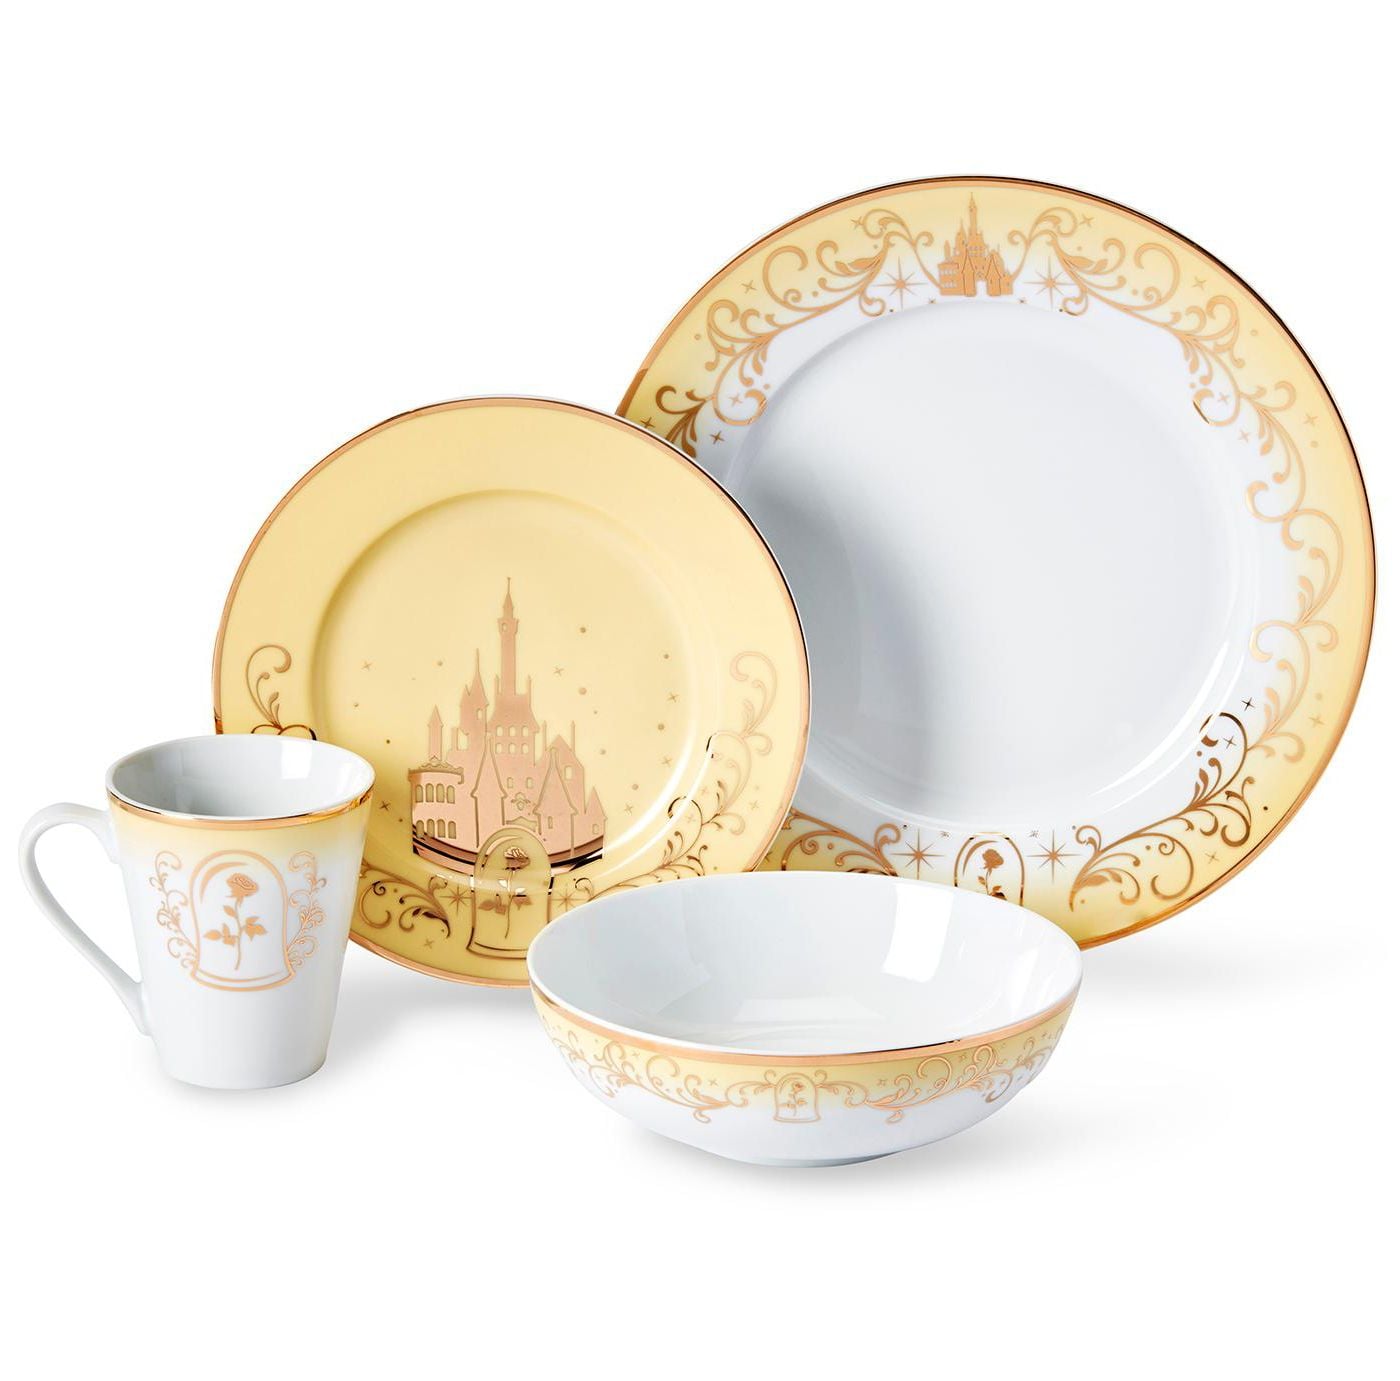 Now You Can Eat Like a Princess with This Disney-Themed Dinnerware